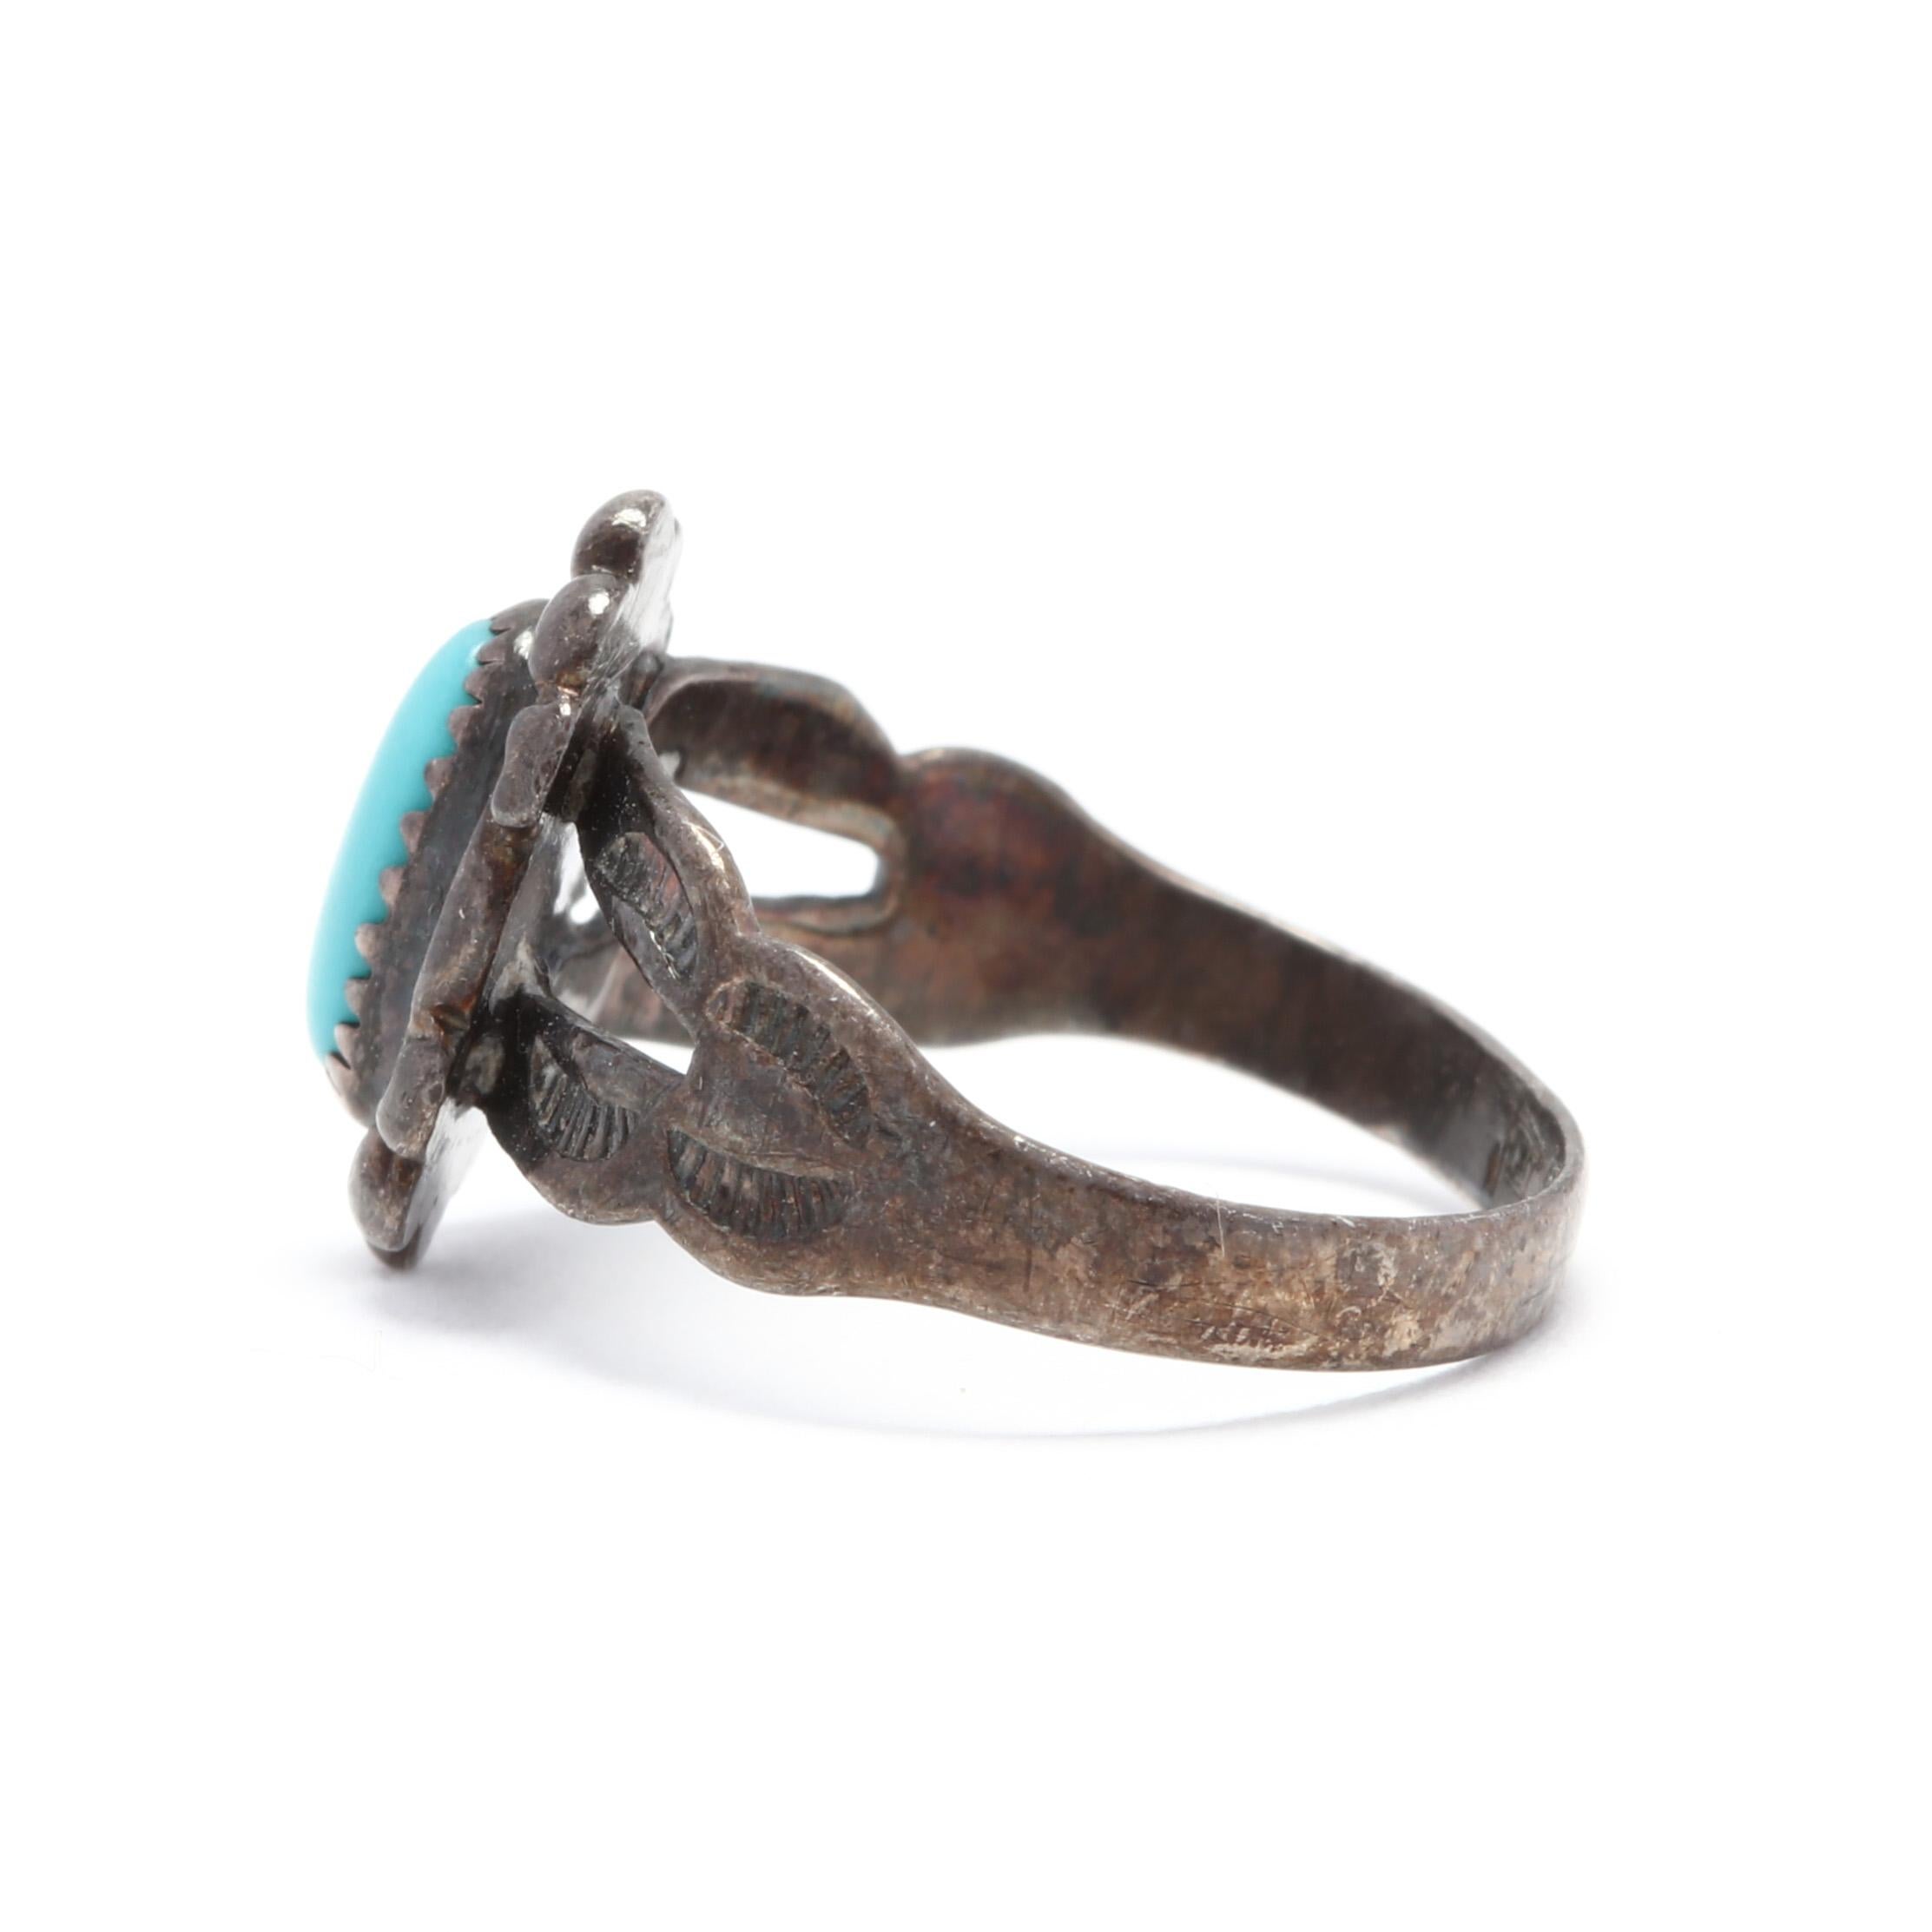 A southwestern sterling silver and turquoise ring. This ring features an oblong, oval turquoise stone surrounded by scroll and bead motifs and with a split shank.

Stone:
- turquoise
- oval cabochon, 1 stone
- 7 x 3.5 mm

Ring Size 3.5

1.51